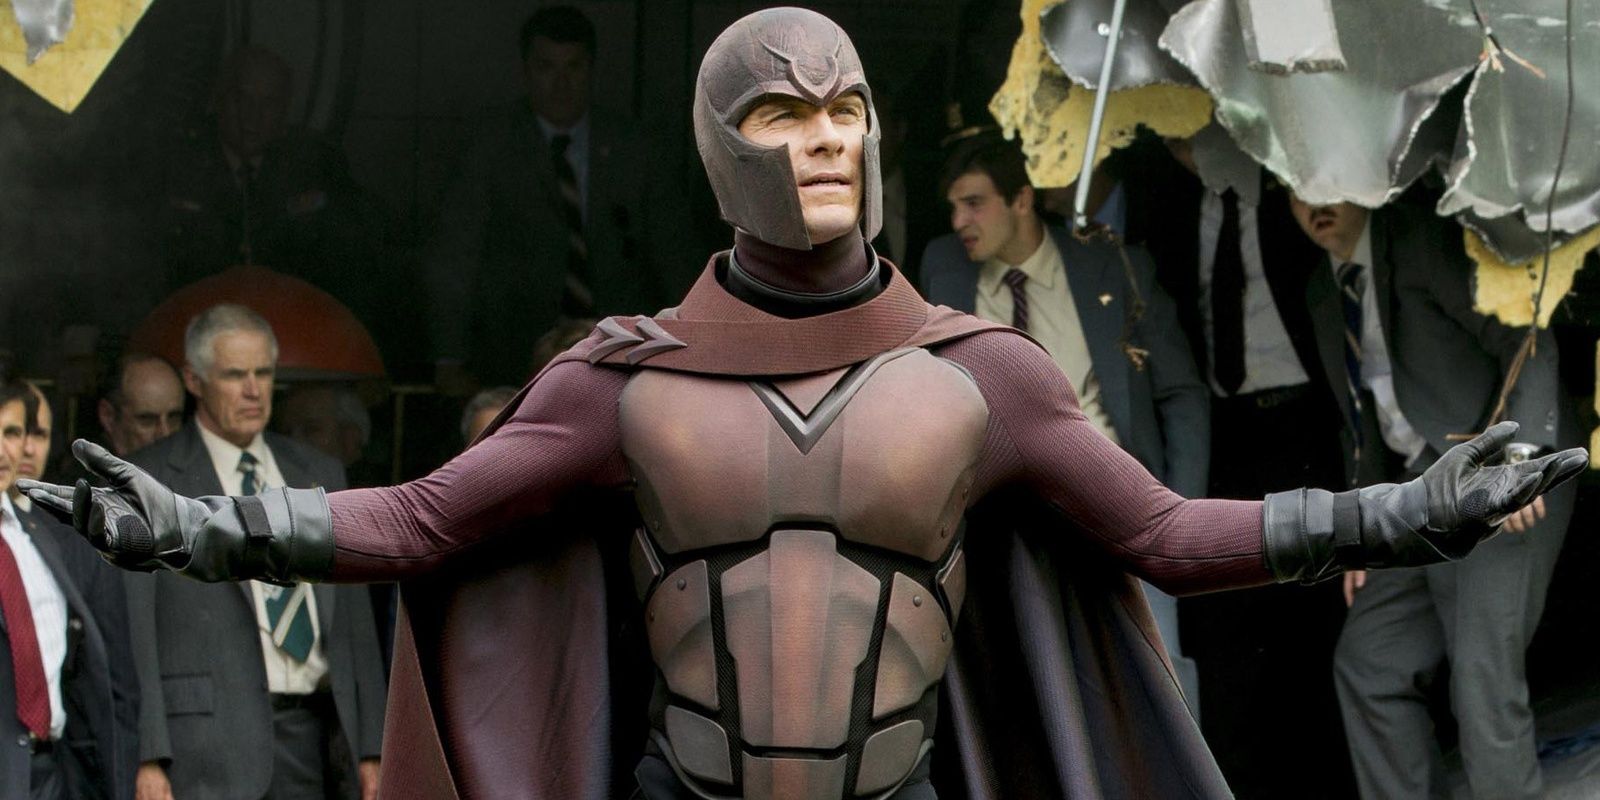 Michael Fassbender As Magneto holding arms out in X-Men Days of Future Past